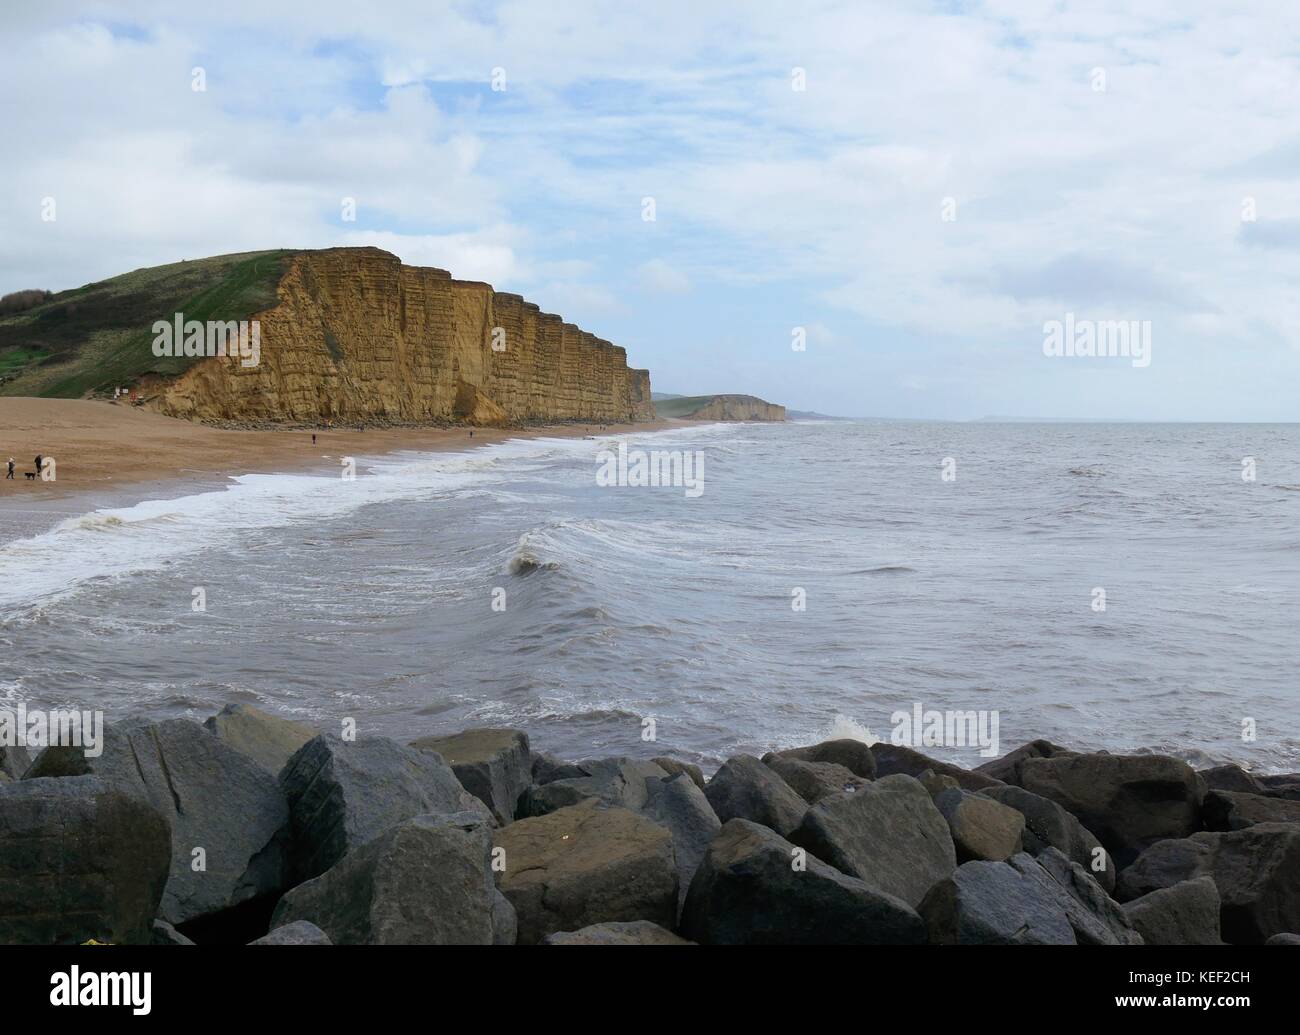 West Bay, Dorset, UK. 20th Oct 2017. UK Weather. People enjoying the relative calm before the storm predicted to hit the UK later today on a sunny but blustery day at the beach. Credit: Dan Tucker/Alamy Live News Stock Photo